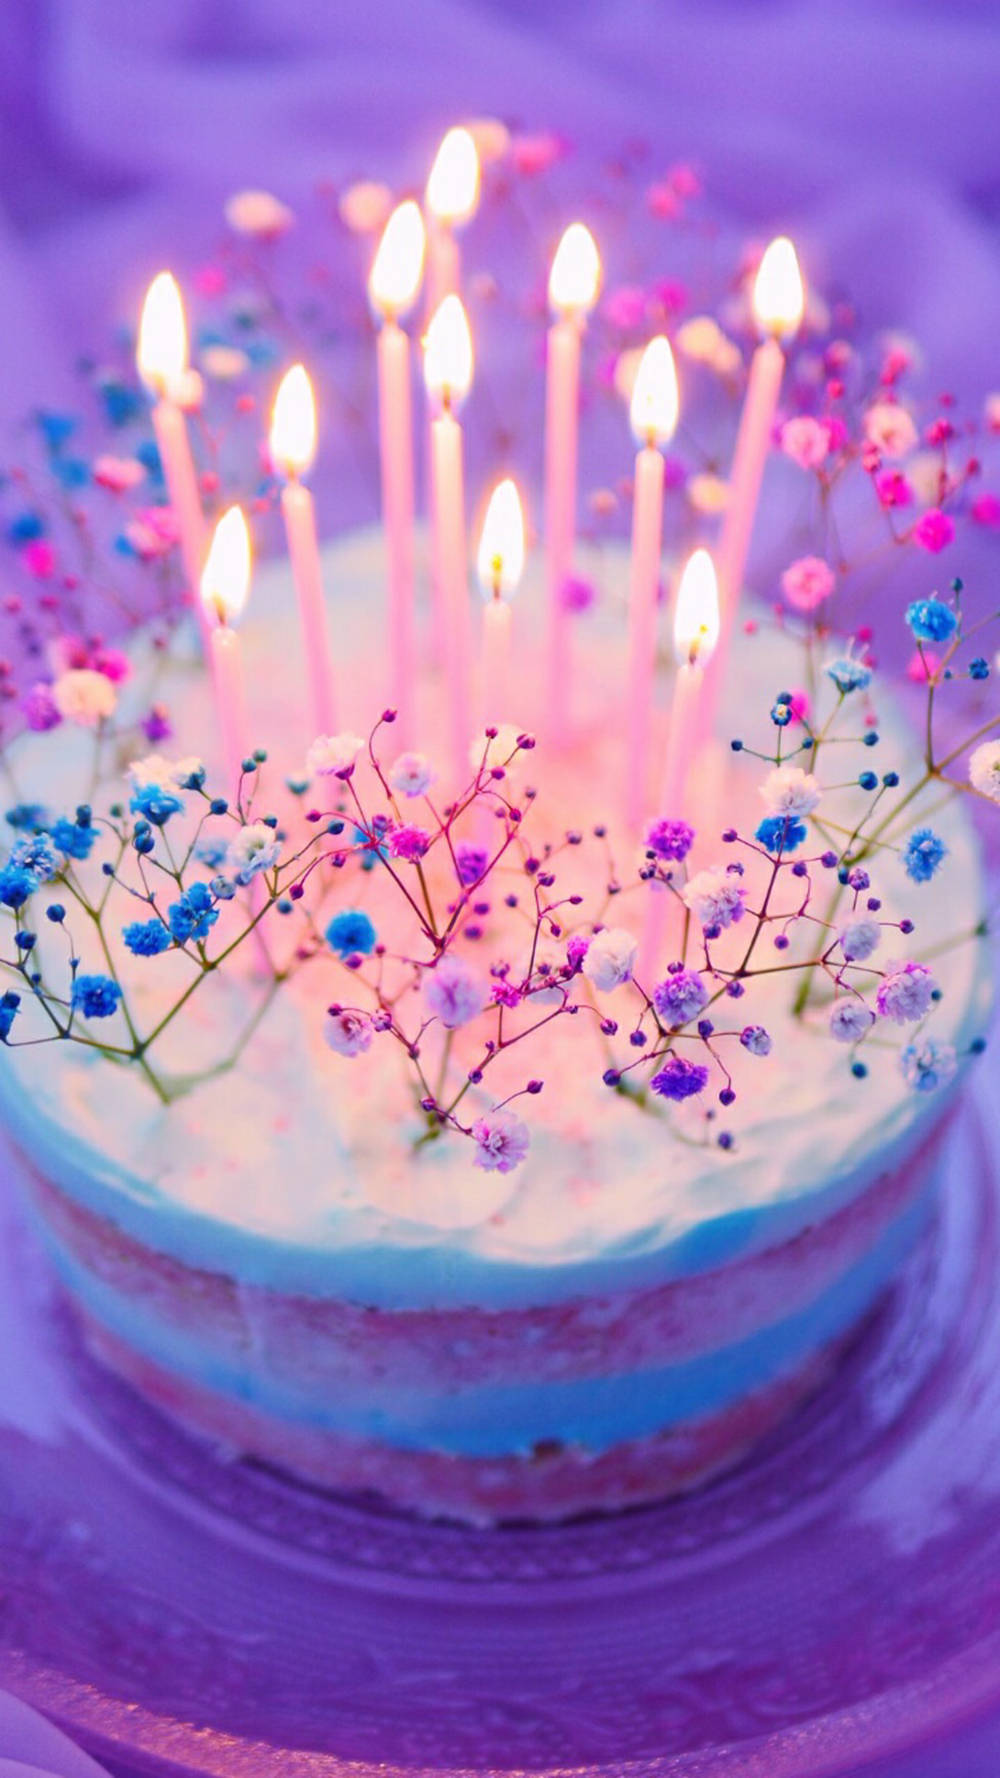 Aesthetic Happy Birthday Cake And Candles Background